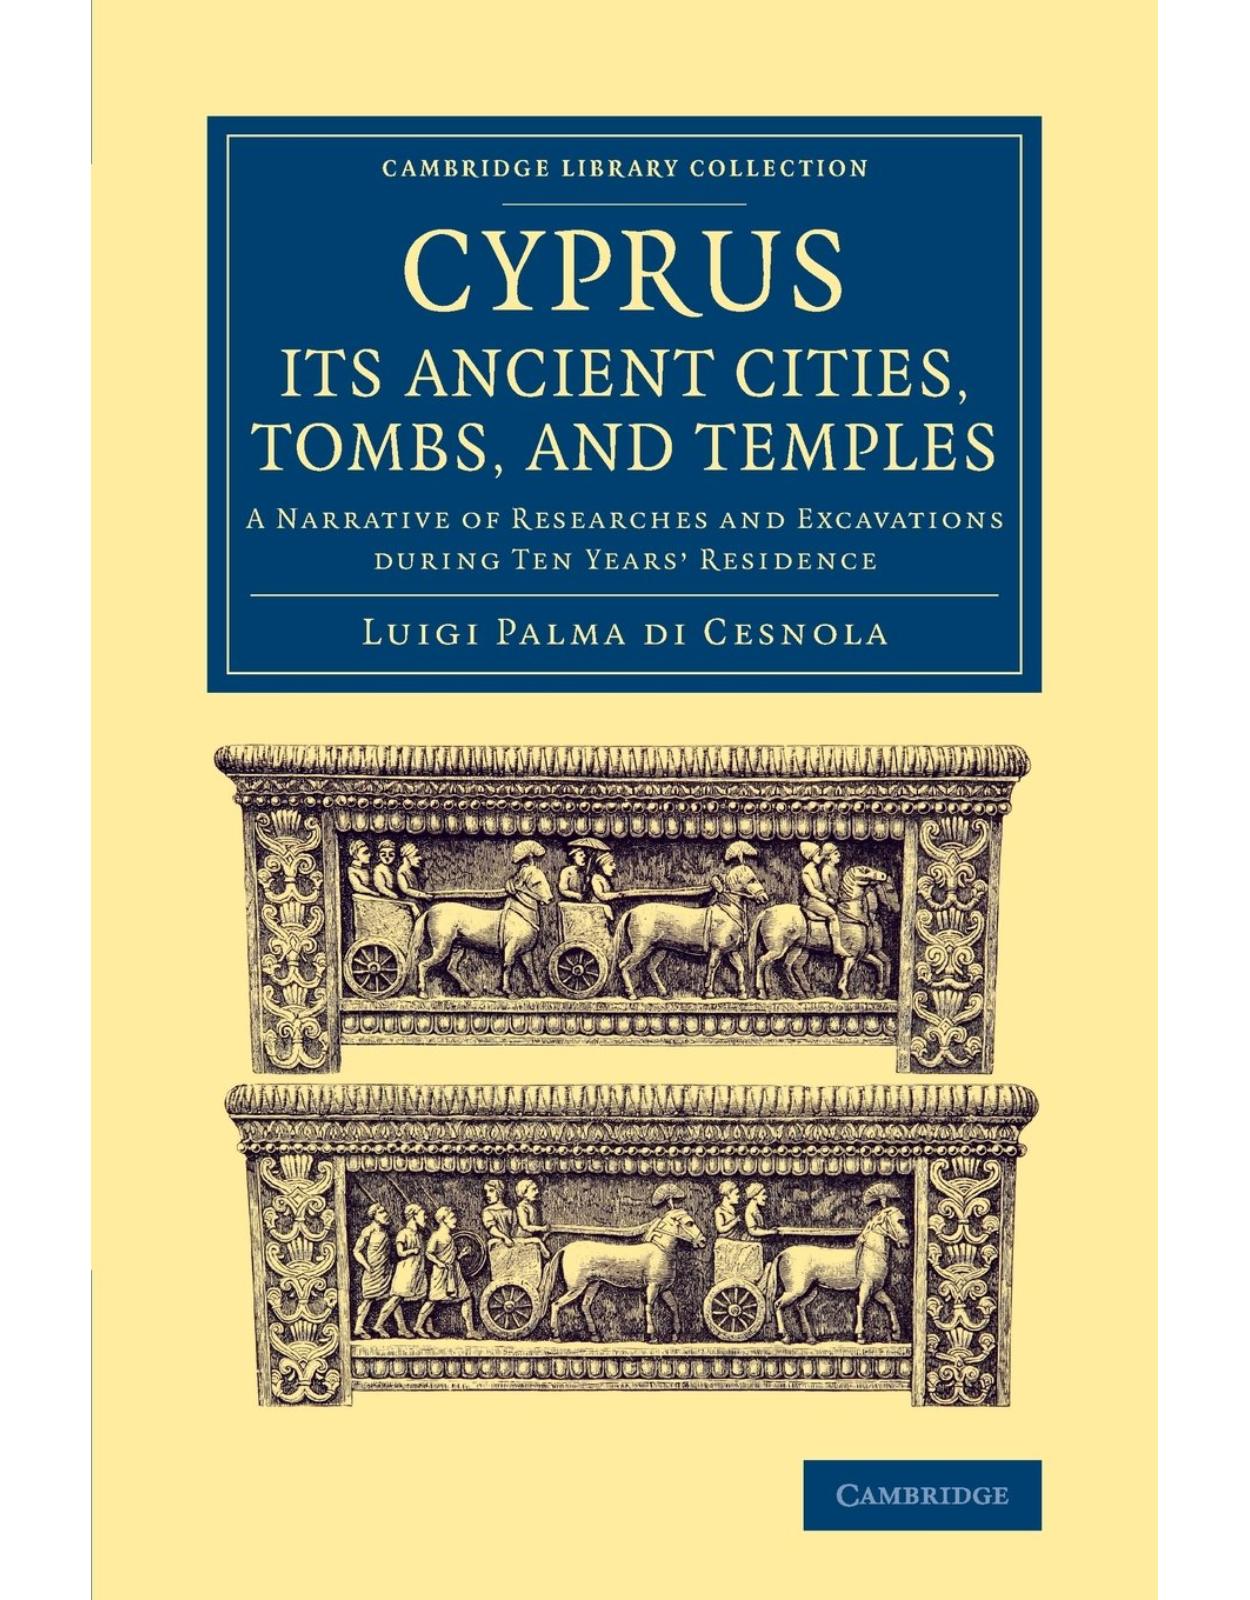 Cyprus: Its Ancient Cities, Tombs, and Temples: A Narrative of Researches and Excavations during Ten Years' Residence (Cambridge Library Collection - Archaeology)